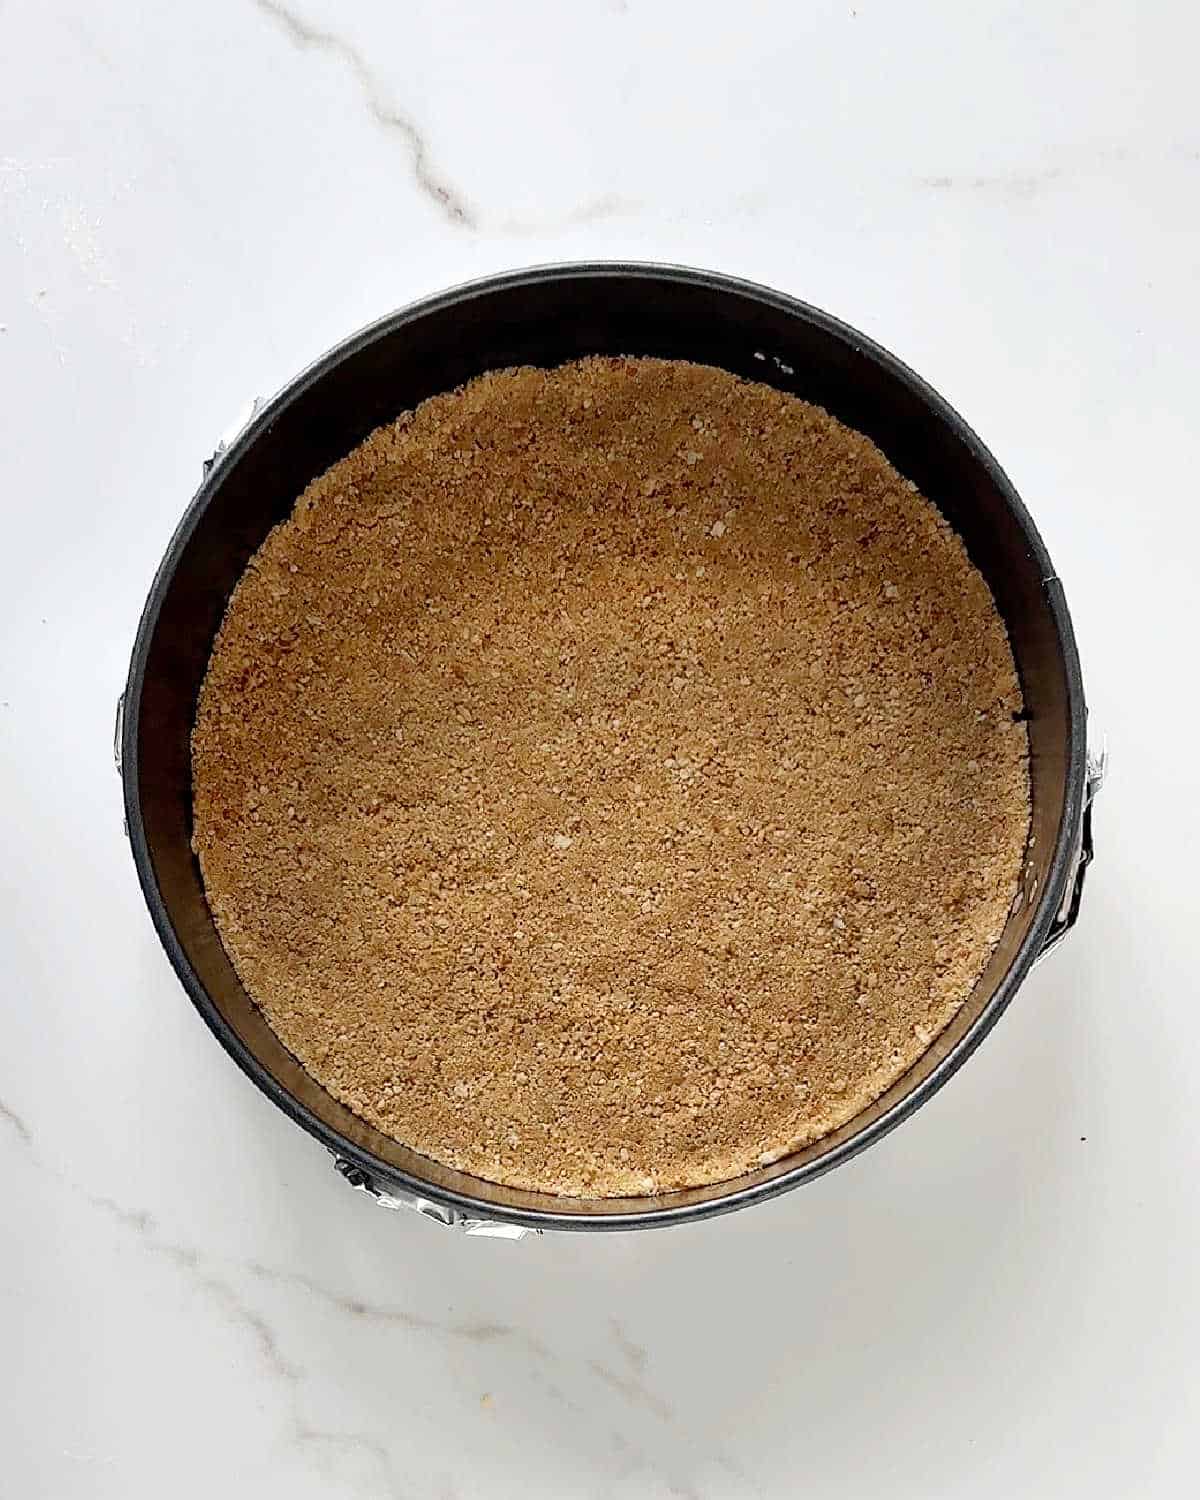 Graham cracker crust for cheesecake in a round dark metal cake pan on white marble.